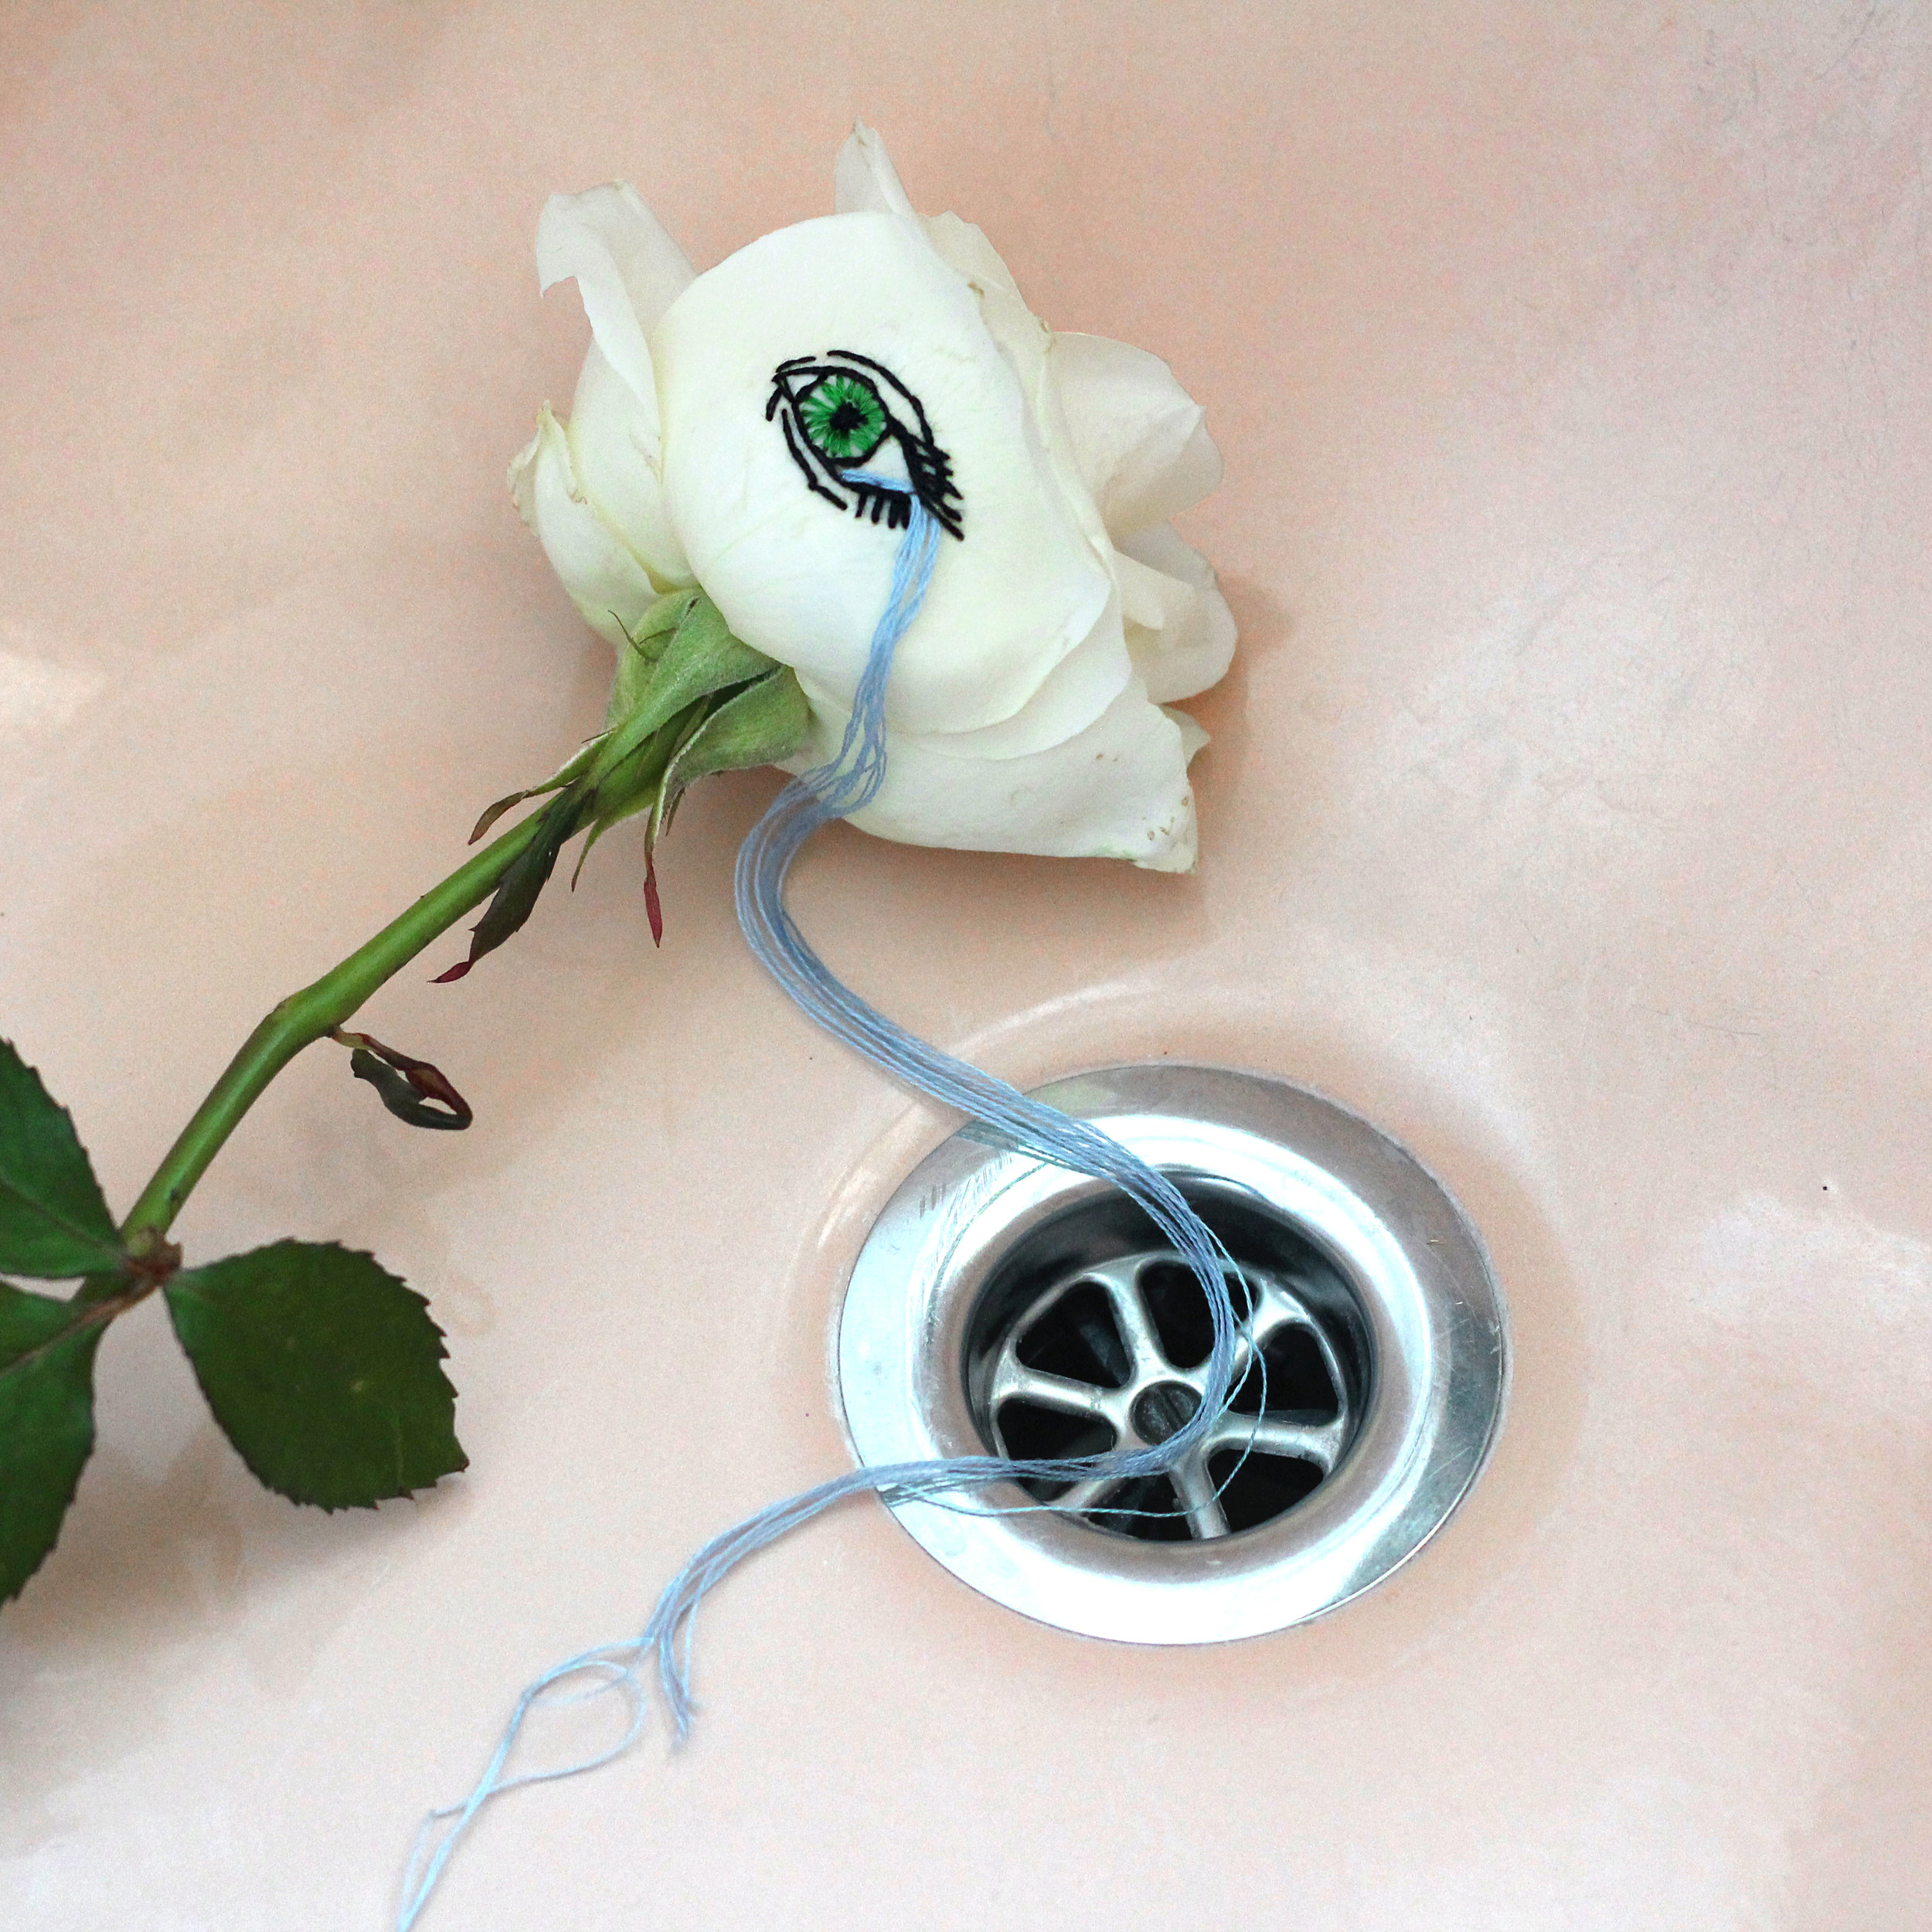 embroidered "crying eye" real rose in bath, 2019